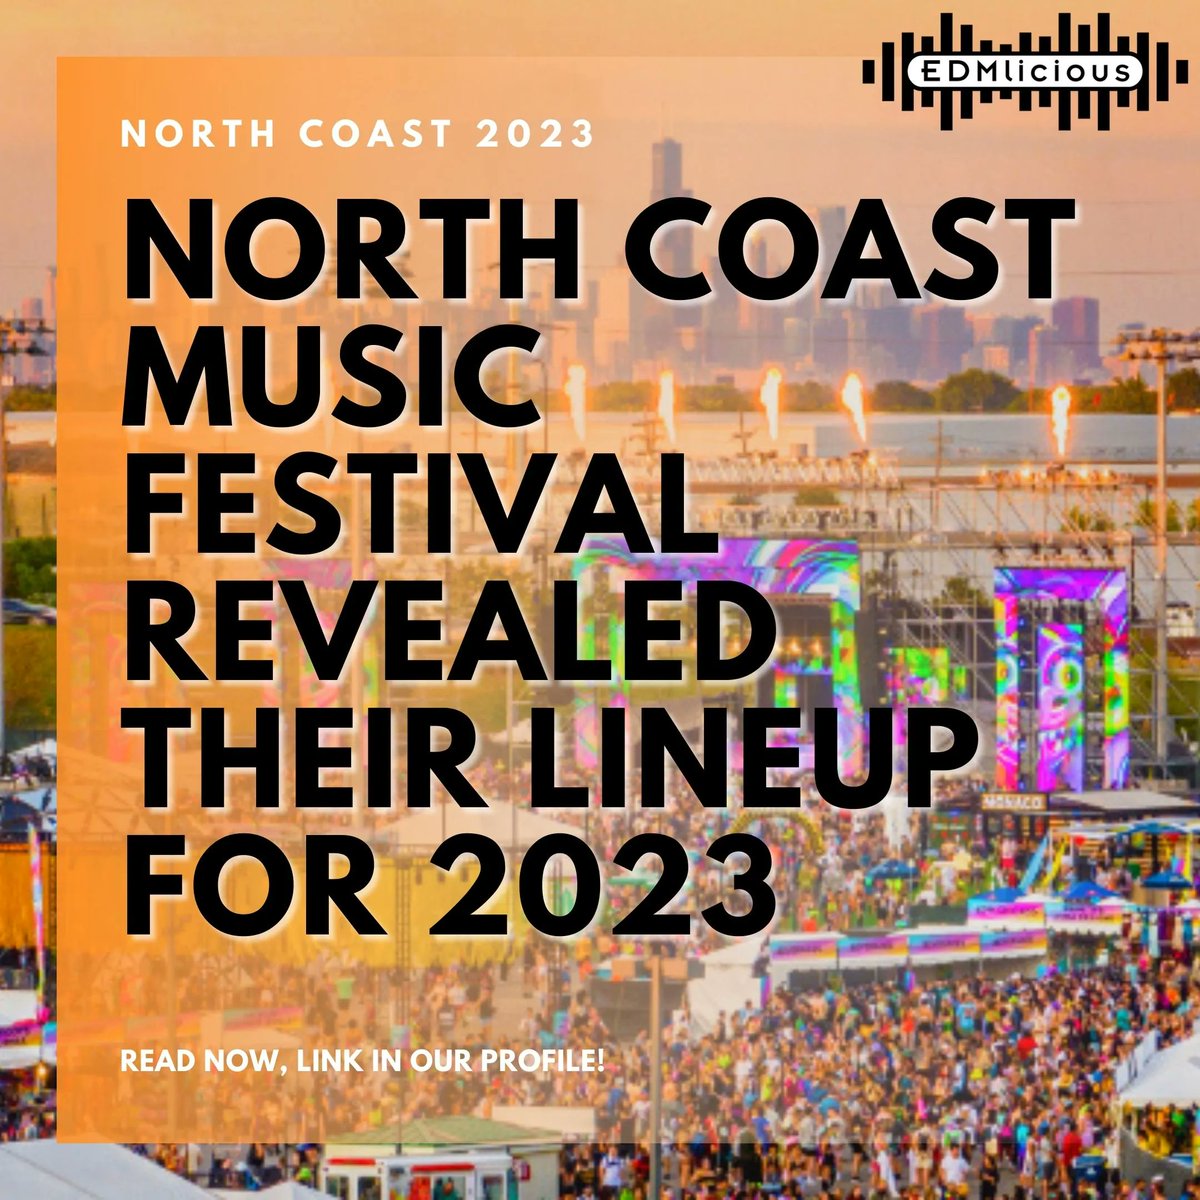 @northcoastfest revealed their lineup for 2023 and it is not disappointing! Are you going? ✨🤩

#edmnews #edmmusicnews #edmfestivalnews #ravenews #ravingnews #plurnews #musicfestivalnews #djnews #festivalnews #eventnews #edmeventnews #dancenews #dancemusicnews #edmlife #ravelife